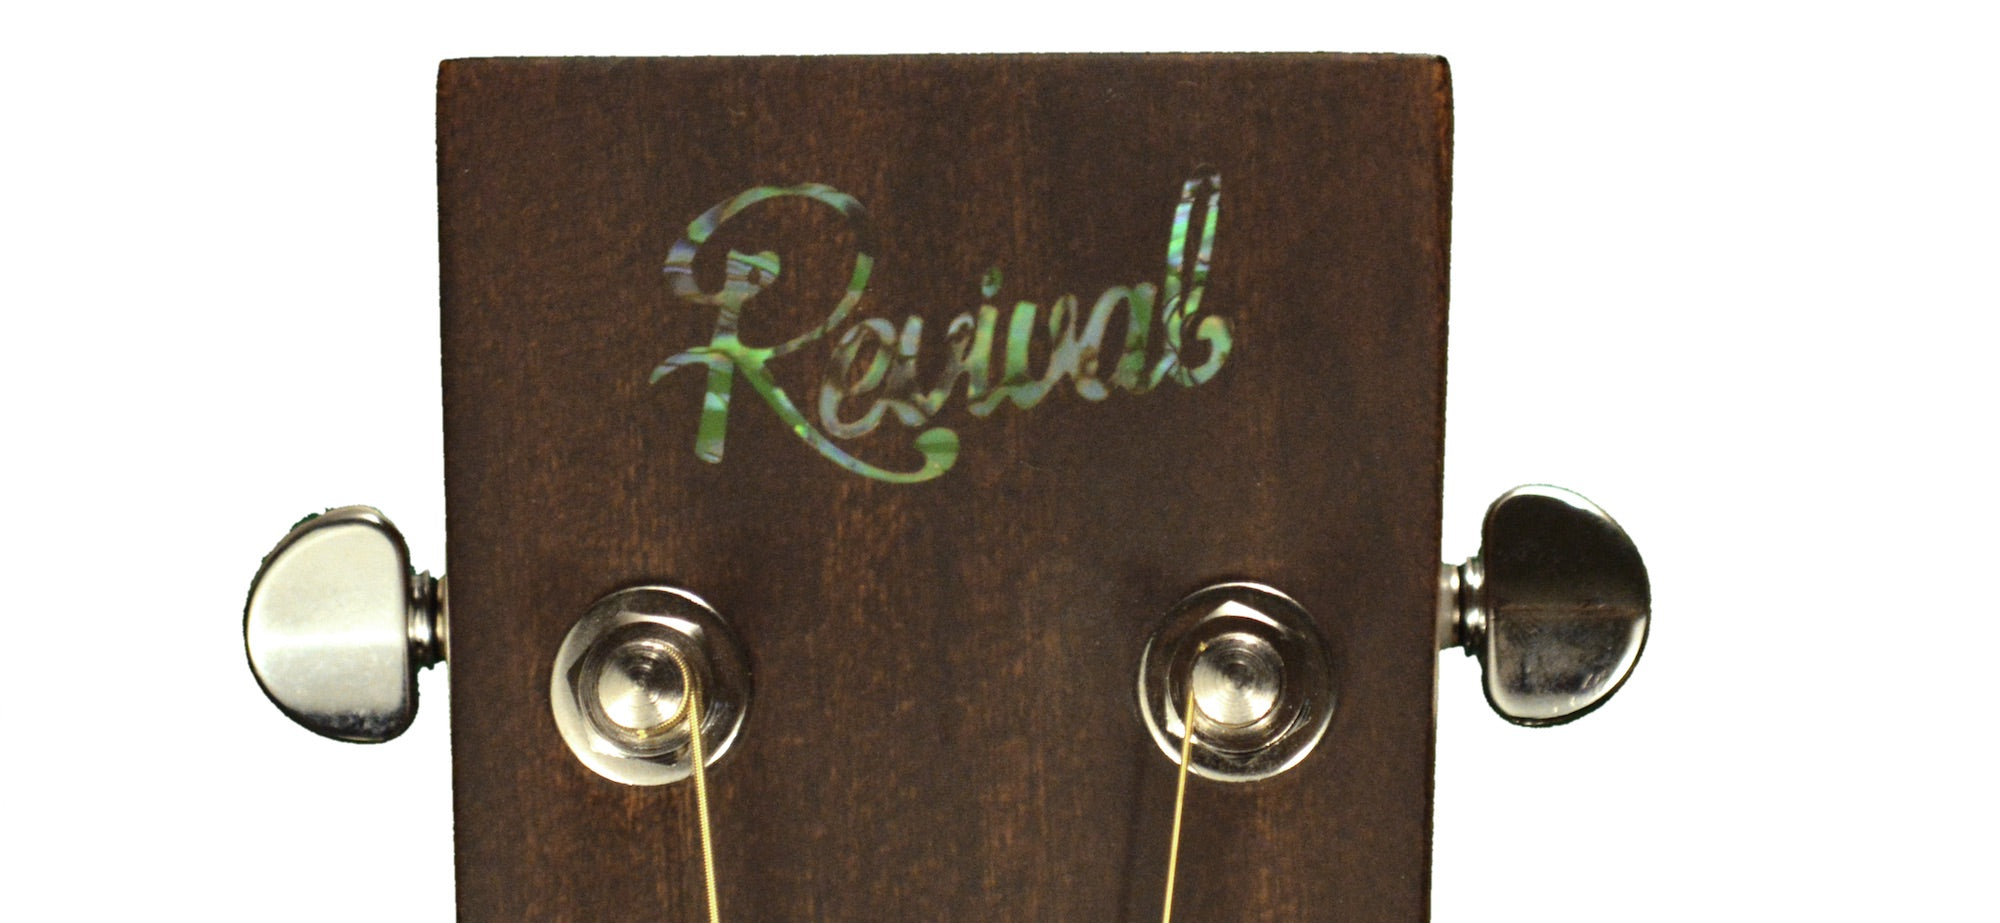 Review: Revival's RG-26M Is a Compact, Affordable Mahogany Guitar That  Delivers Good Tone and Playability